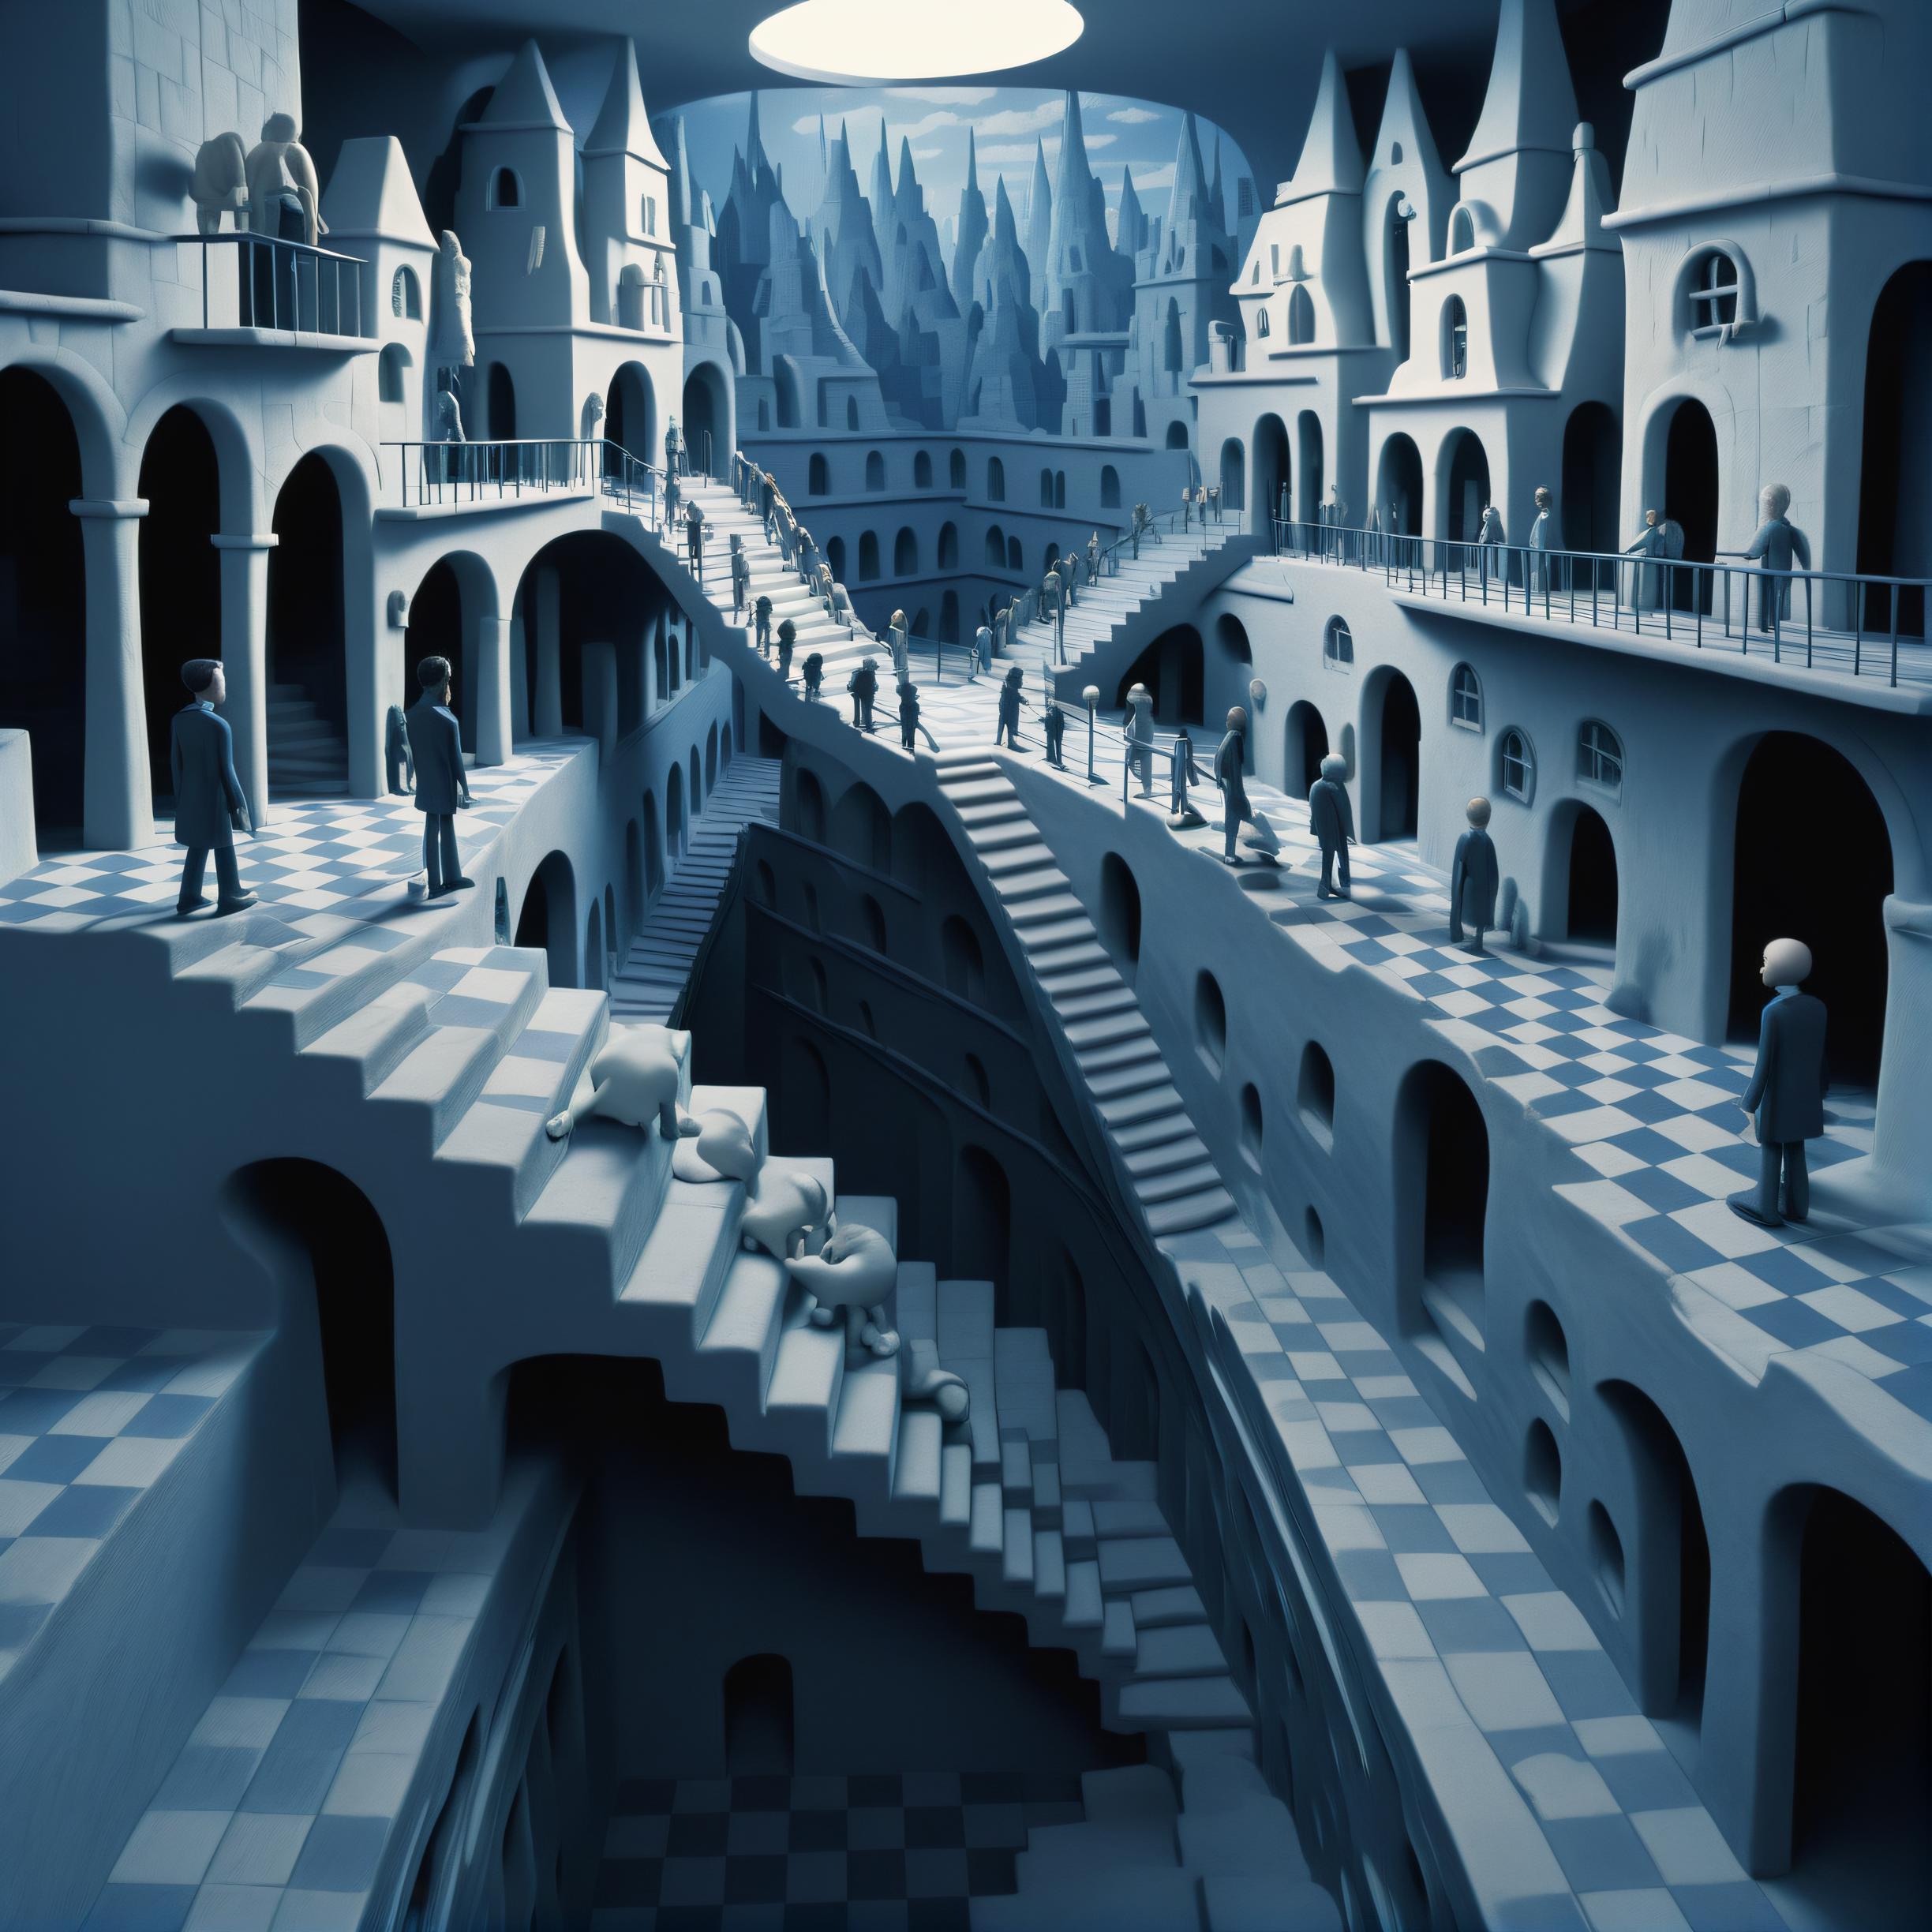 A complex maze of stairs and buildings with a person navigating through it.